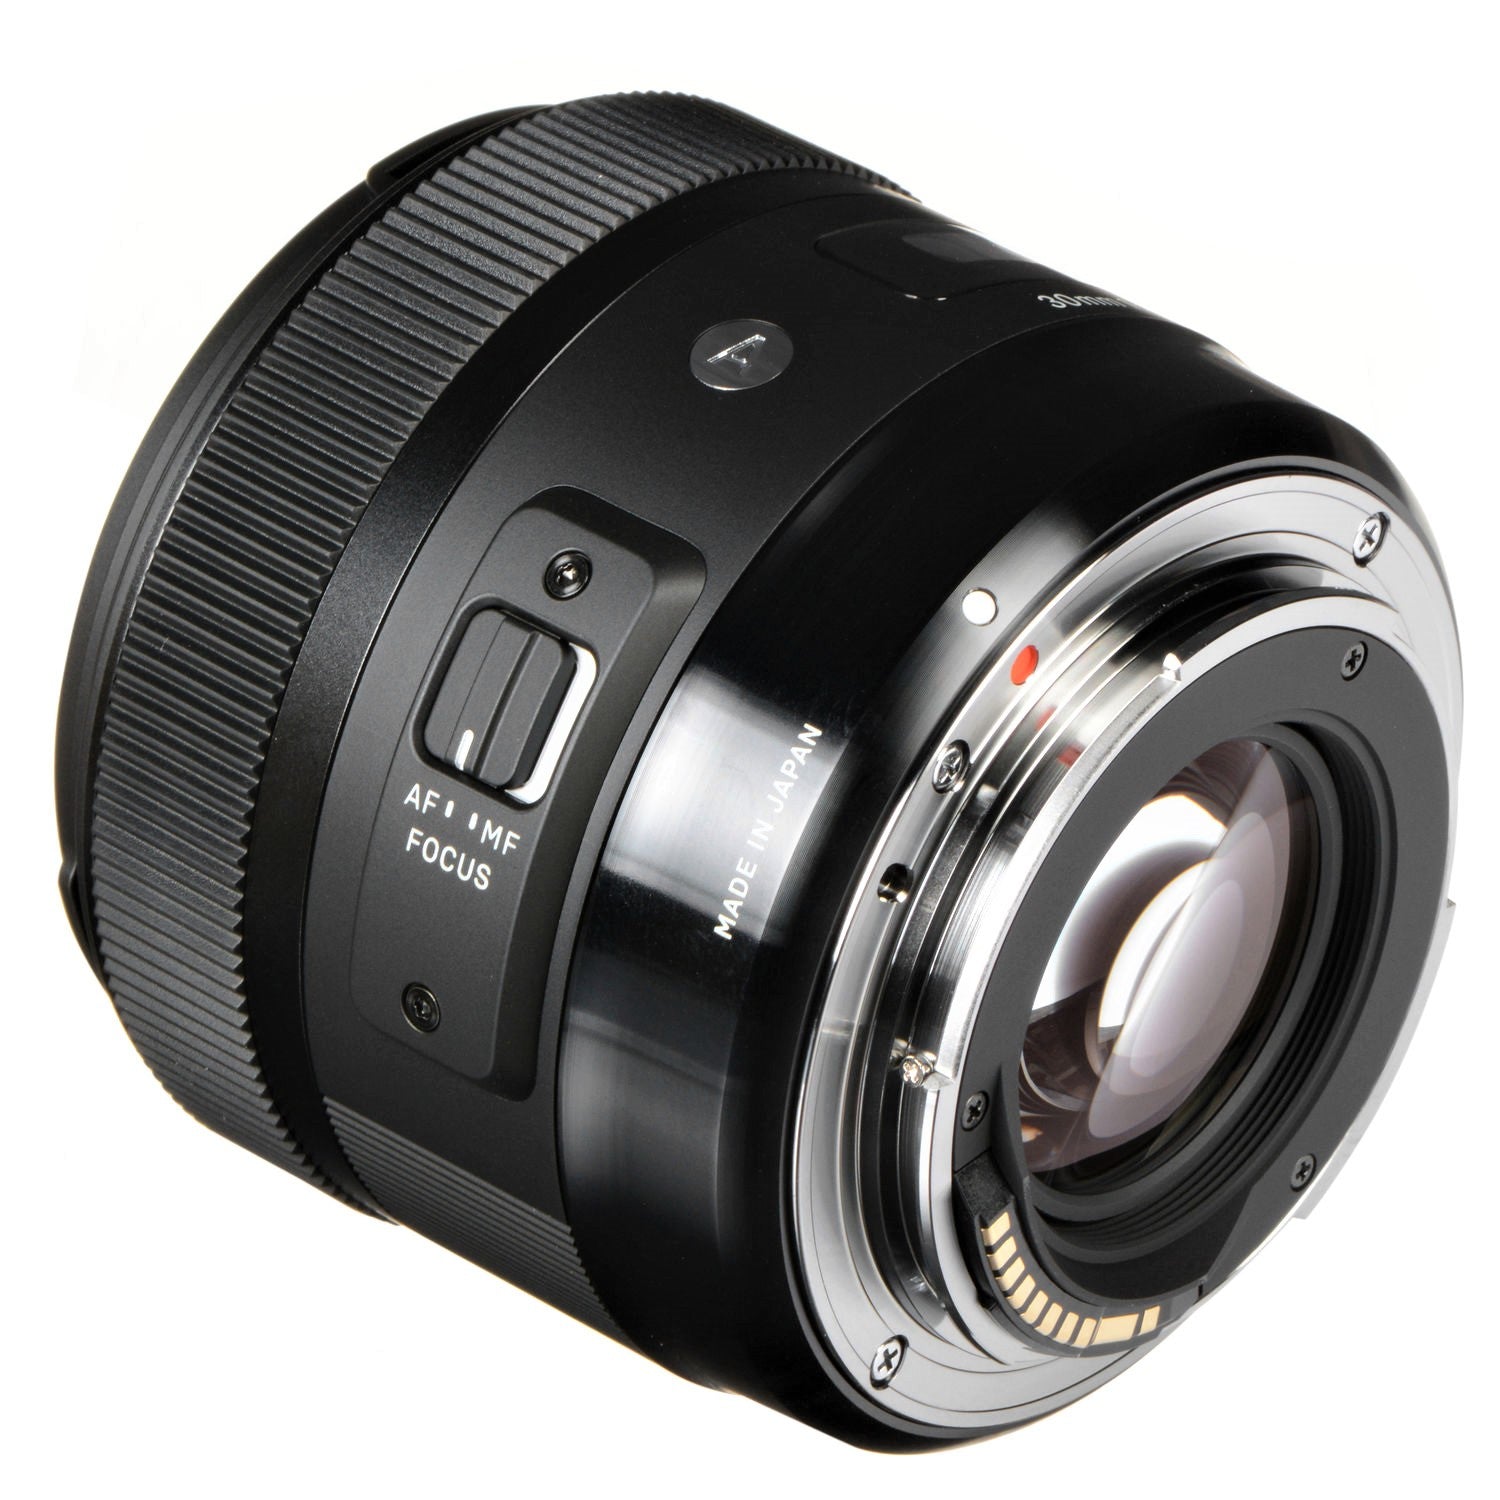 Sigma 30mm F1.4 DC HSM Art Lens for Canon EF